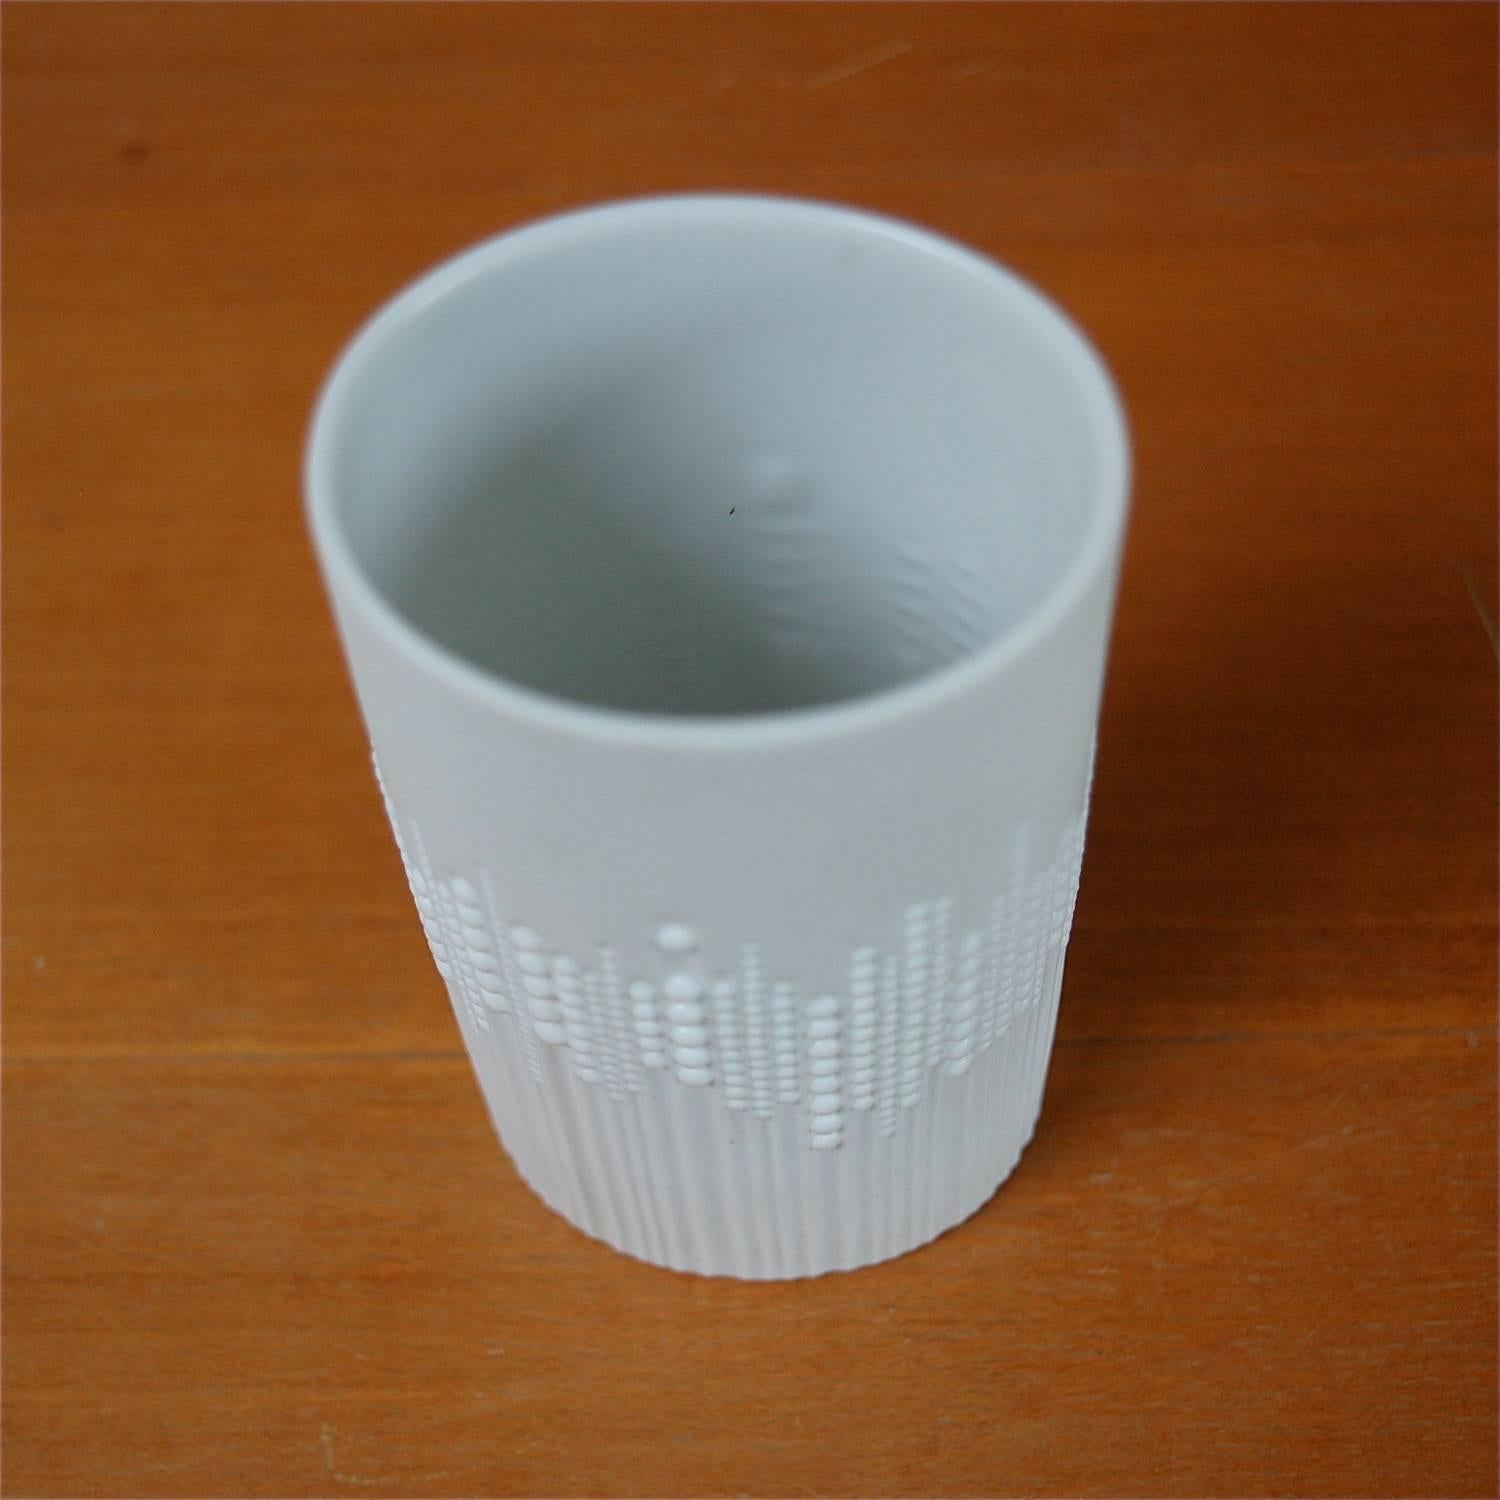 Porcelain pearl drops vase in mint condition designed by Tapio Wirkkala for the Rosenthal Factory based in Germany. The oval shaped vase has a matt white finish. The outer surface consists of carved vertical lines decorated with small round raised